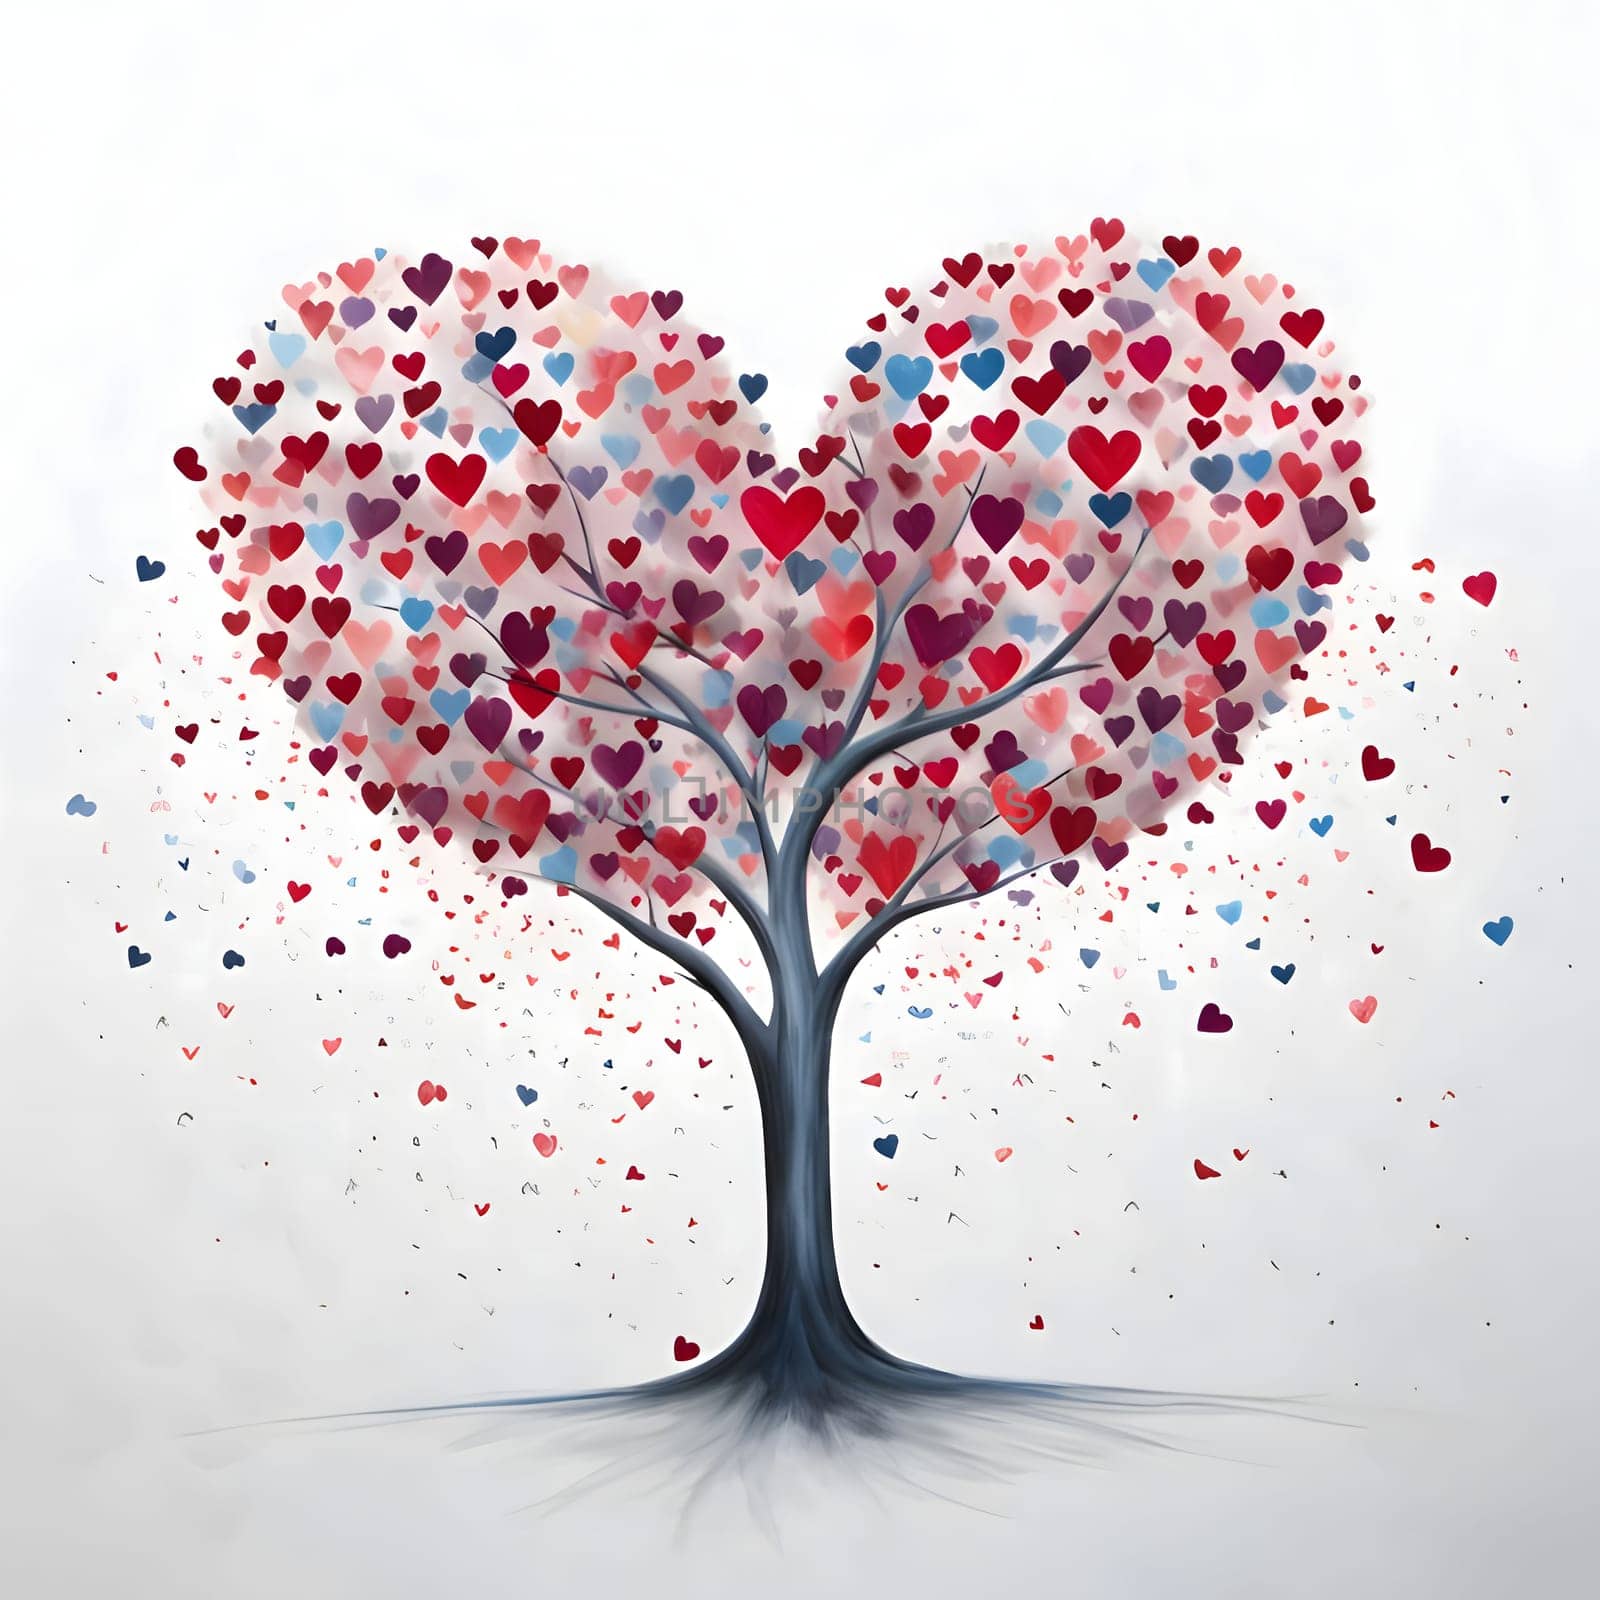 Tree with colorful hearts, white background. Heart as a symbol of affection and love. The time of falling in love and love.